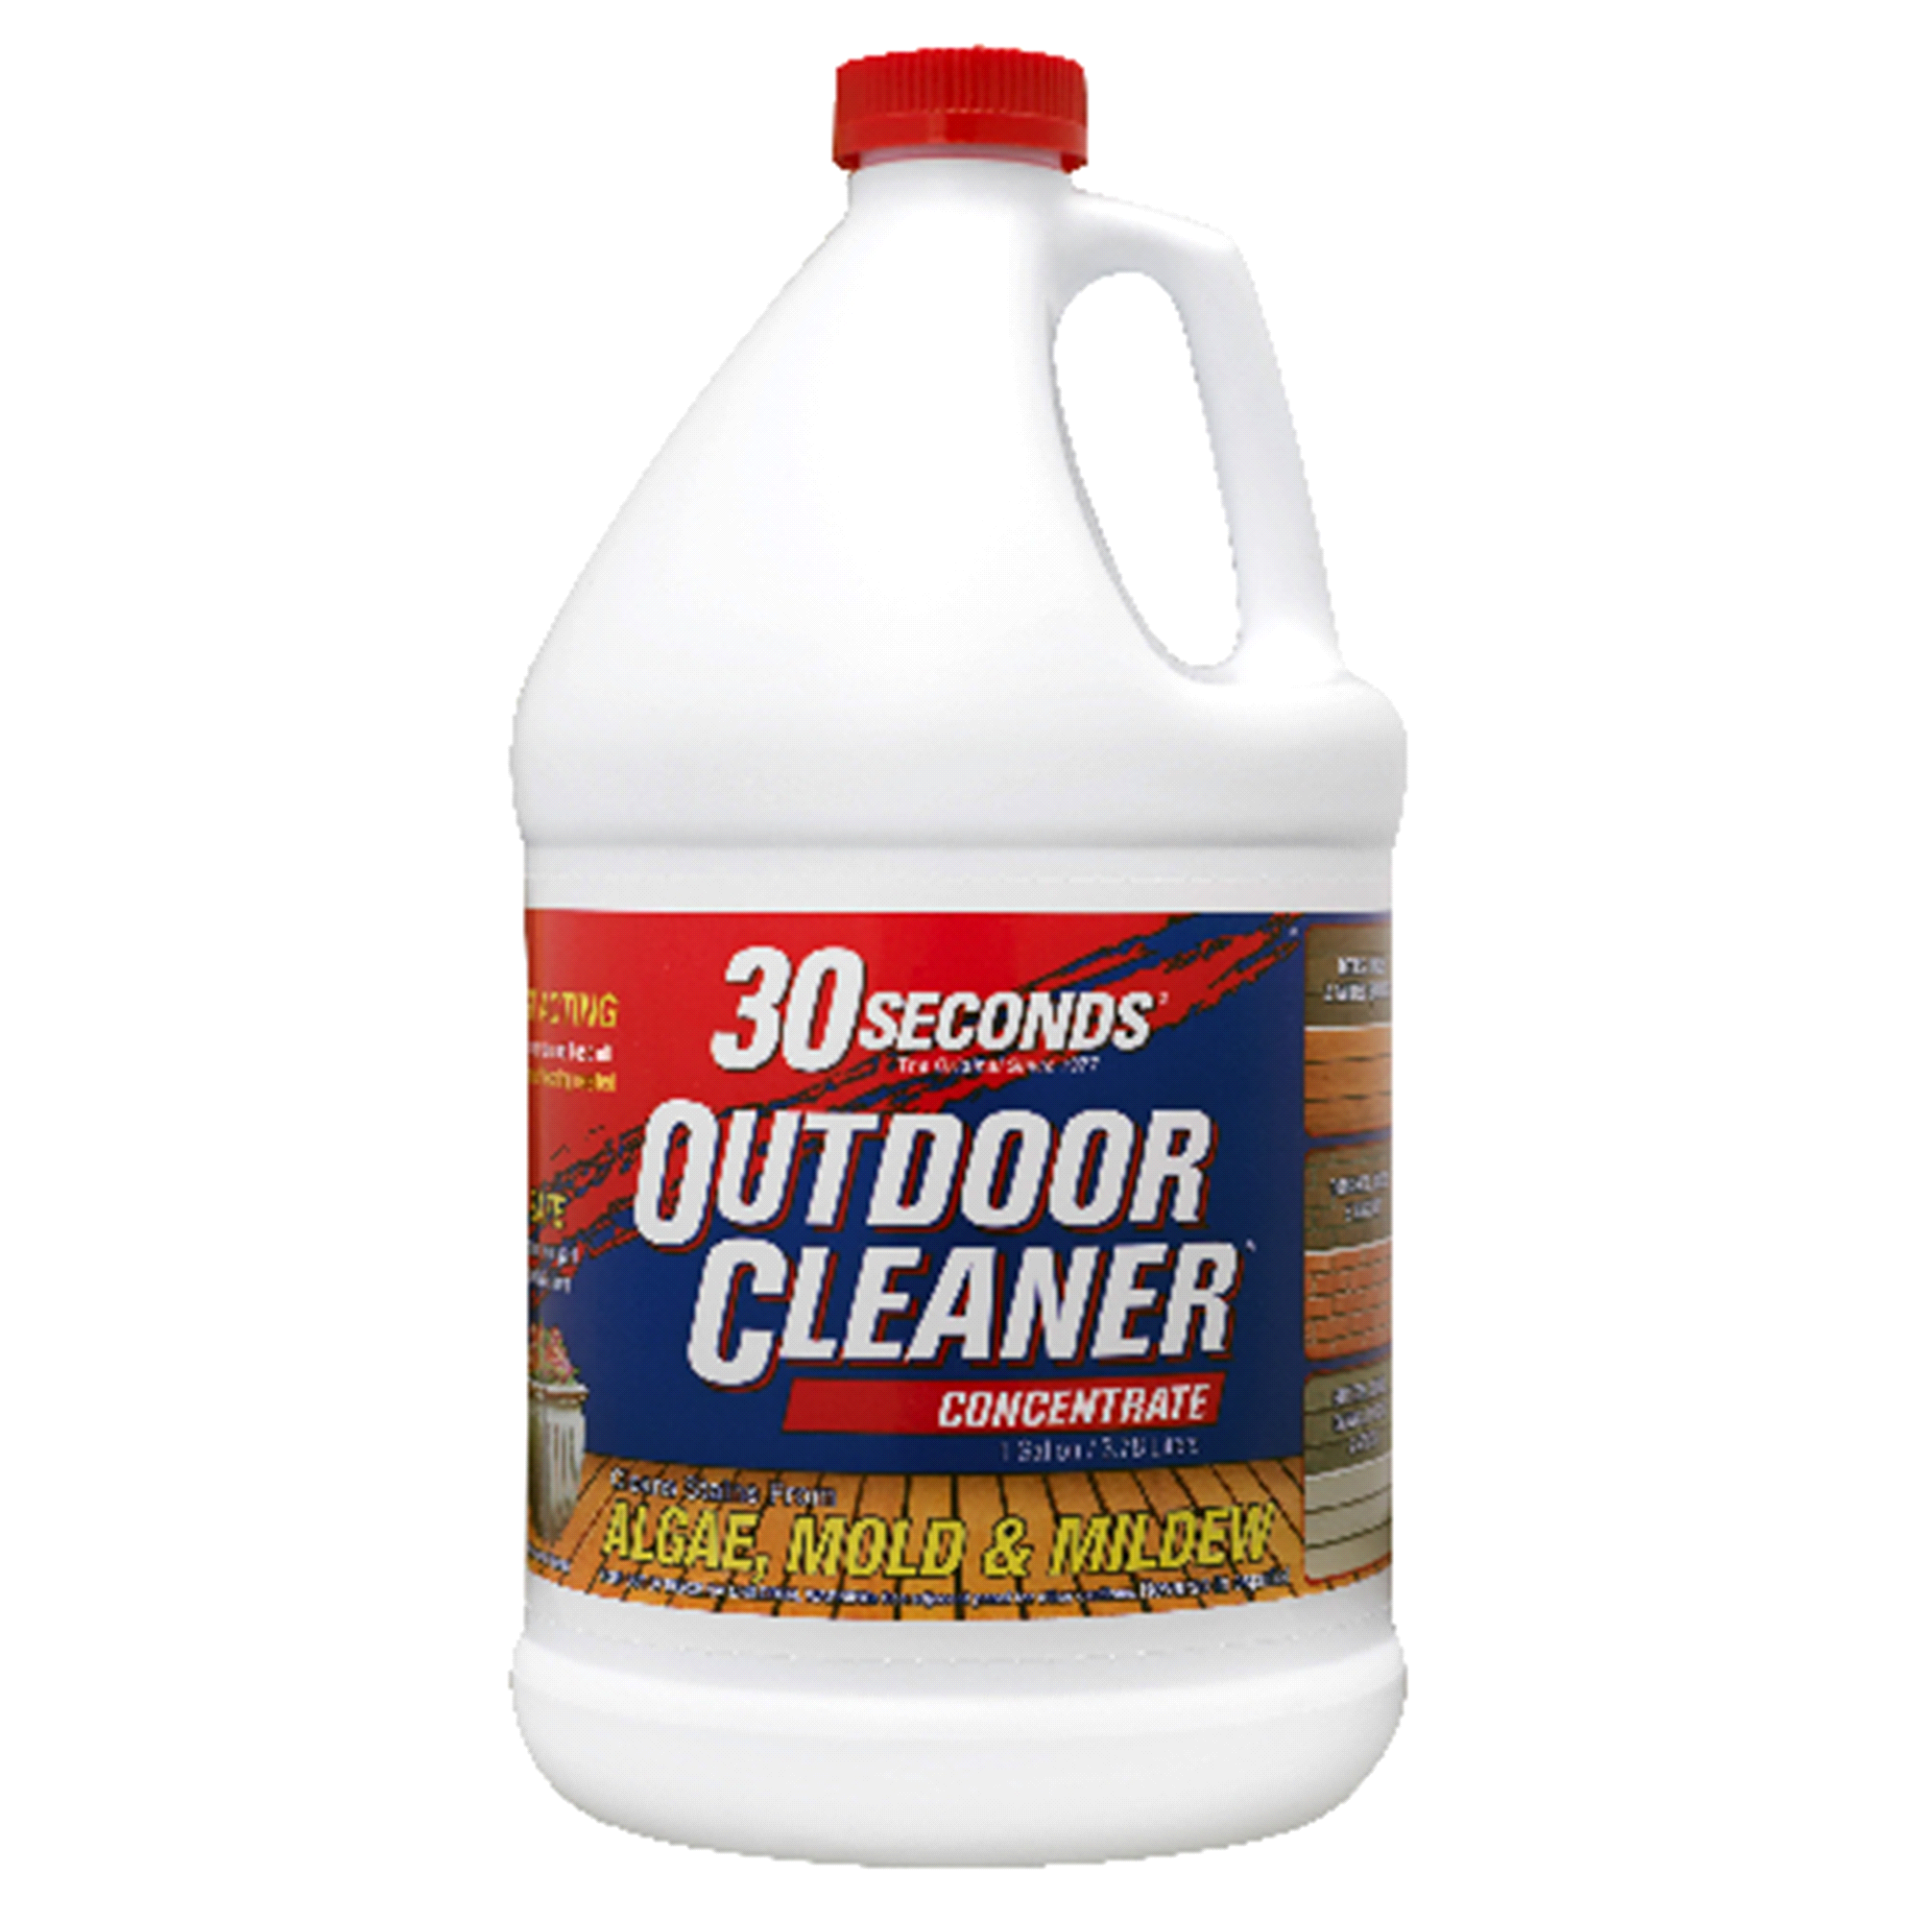 slide 1 of 1, 30 Seconds Outdoor Cleaner Concentrate - 1 Gallon, 1 gal